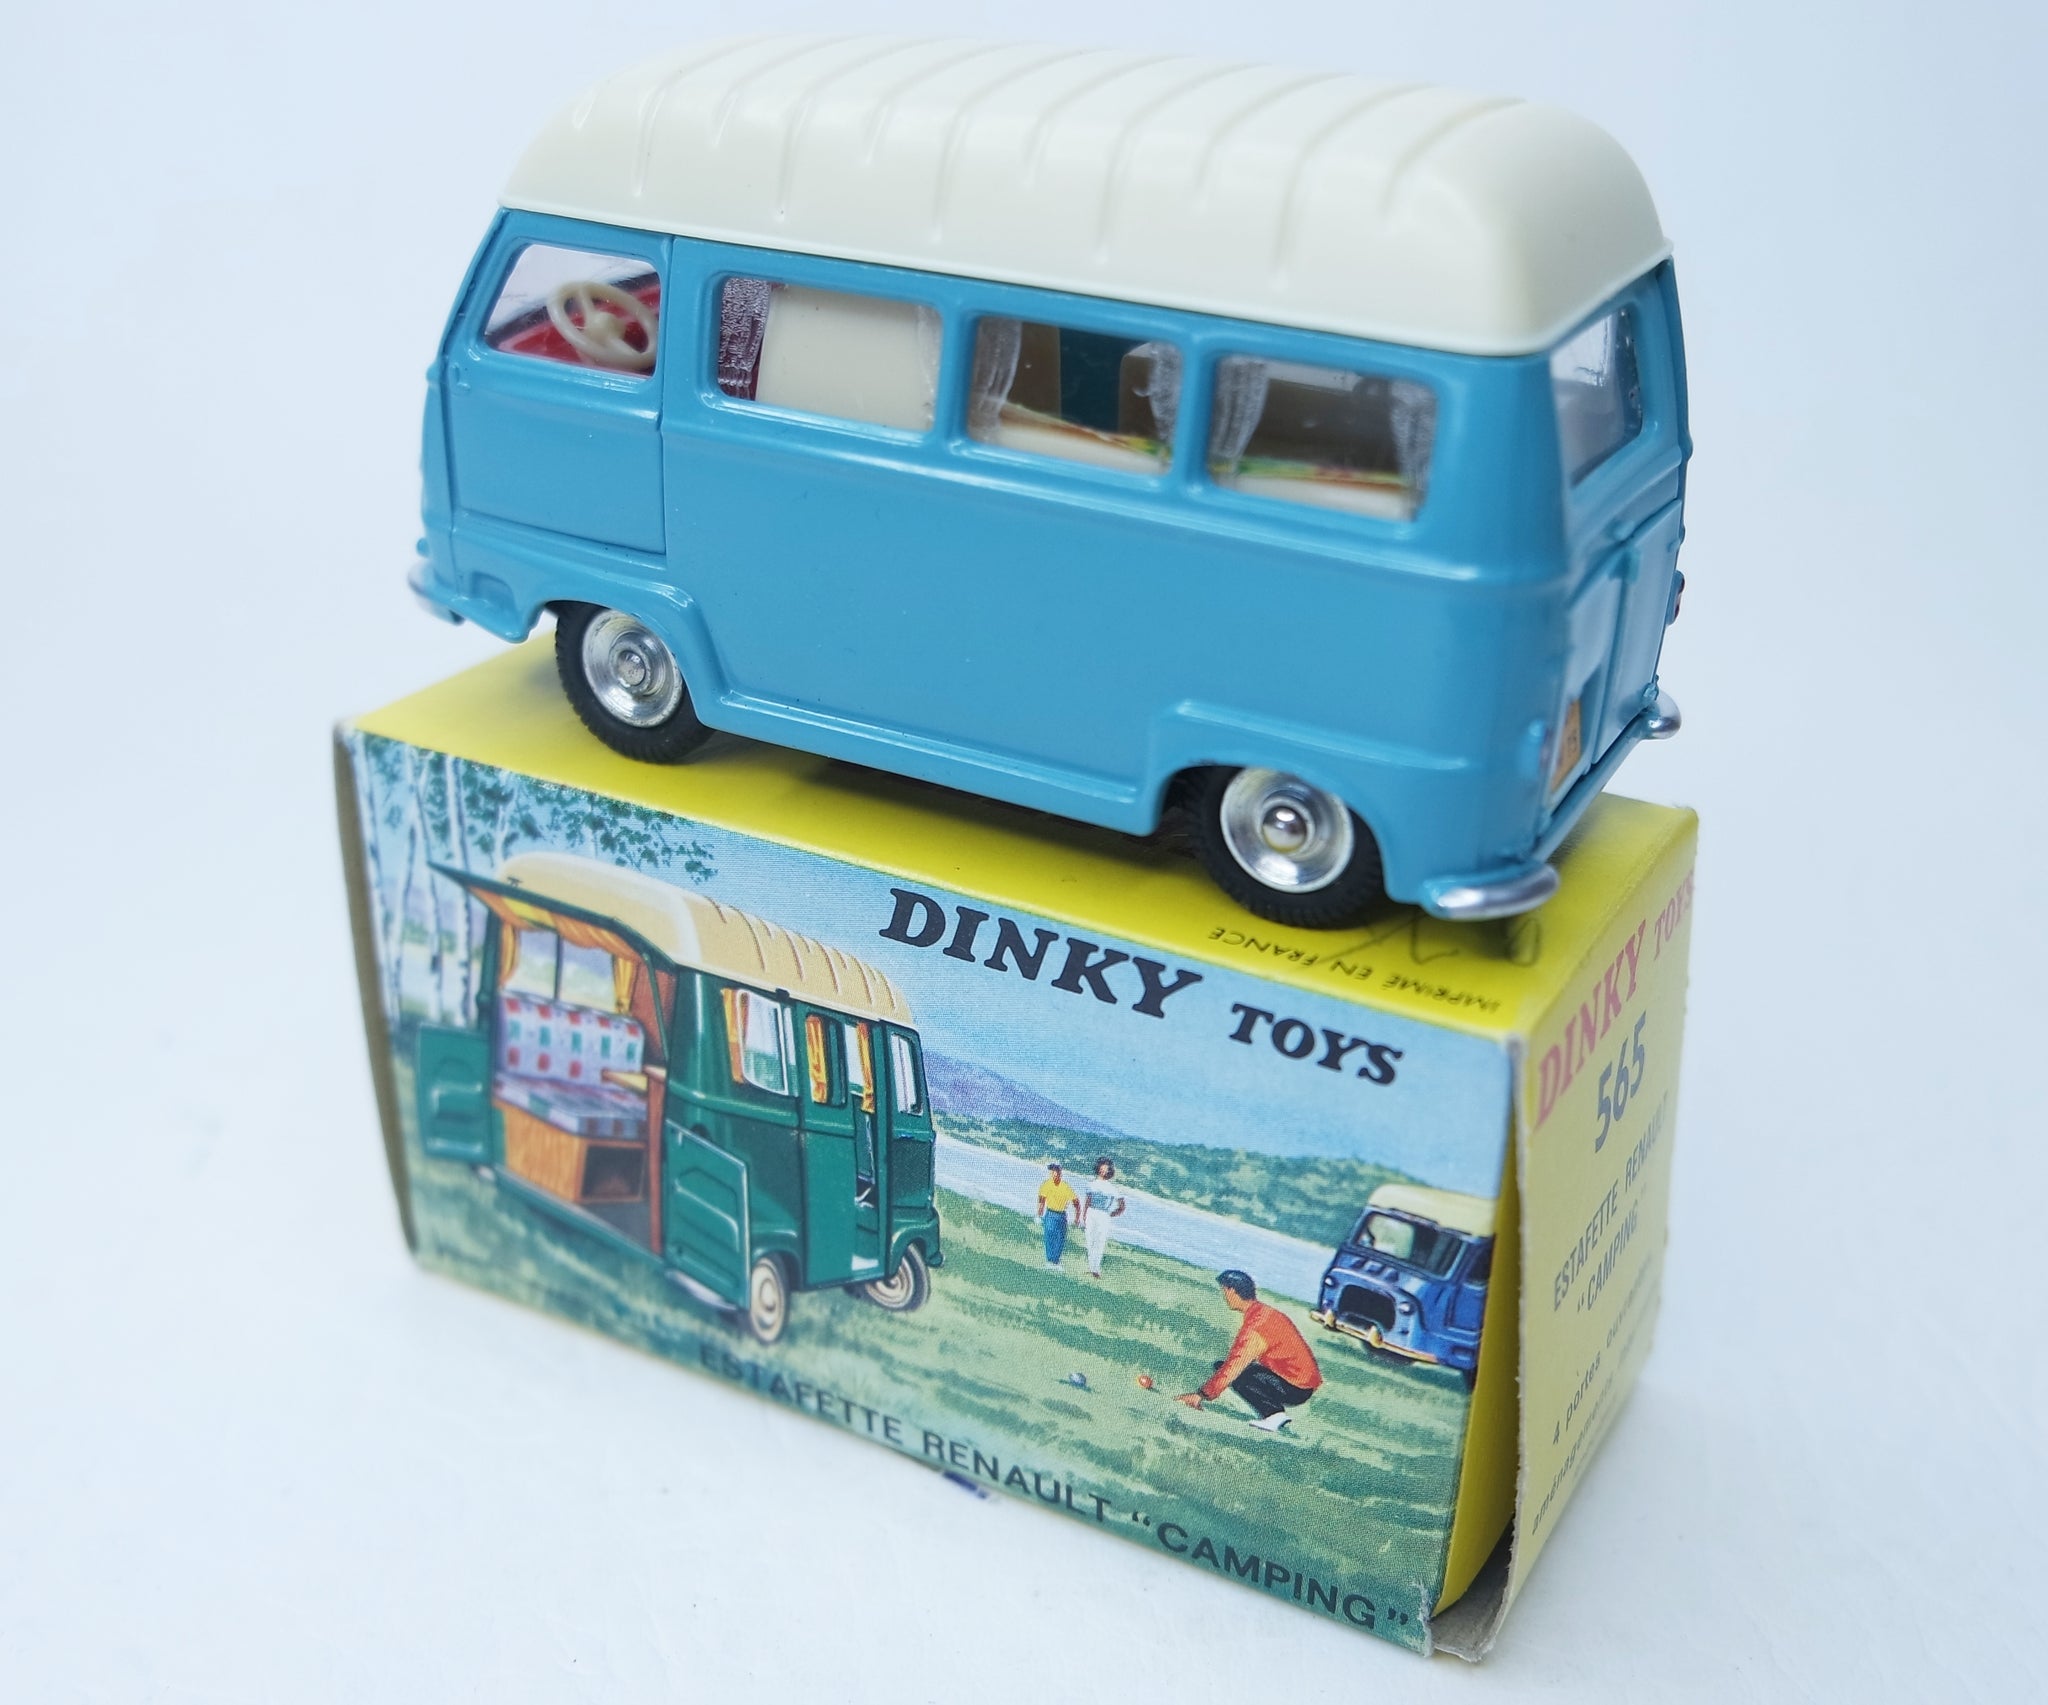 Dinky Toys 565 Estafette Renault 'Camping' Very Near Mint/Boxed 